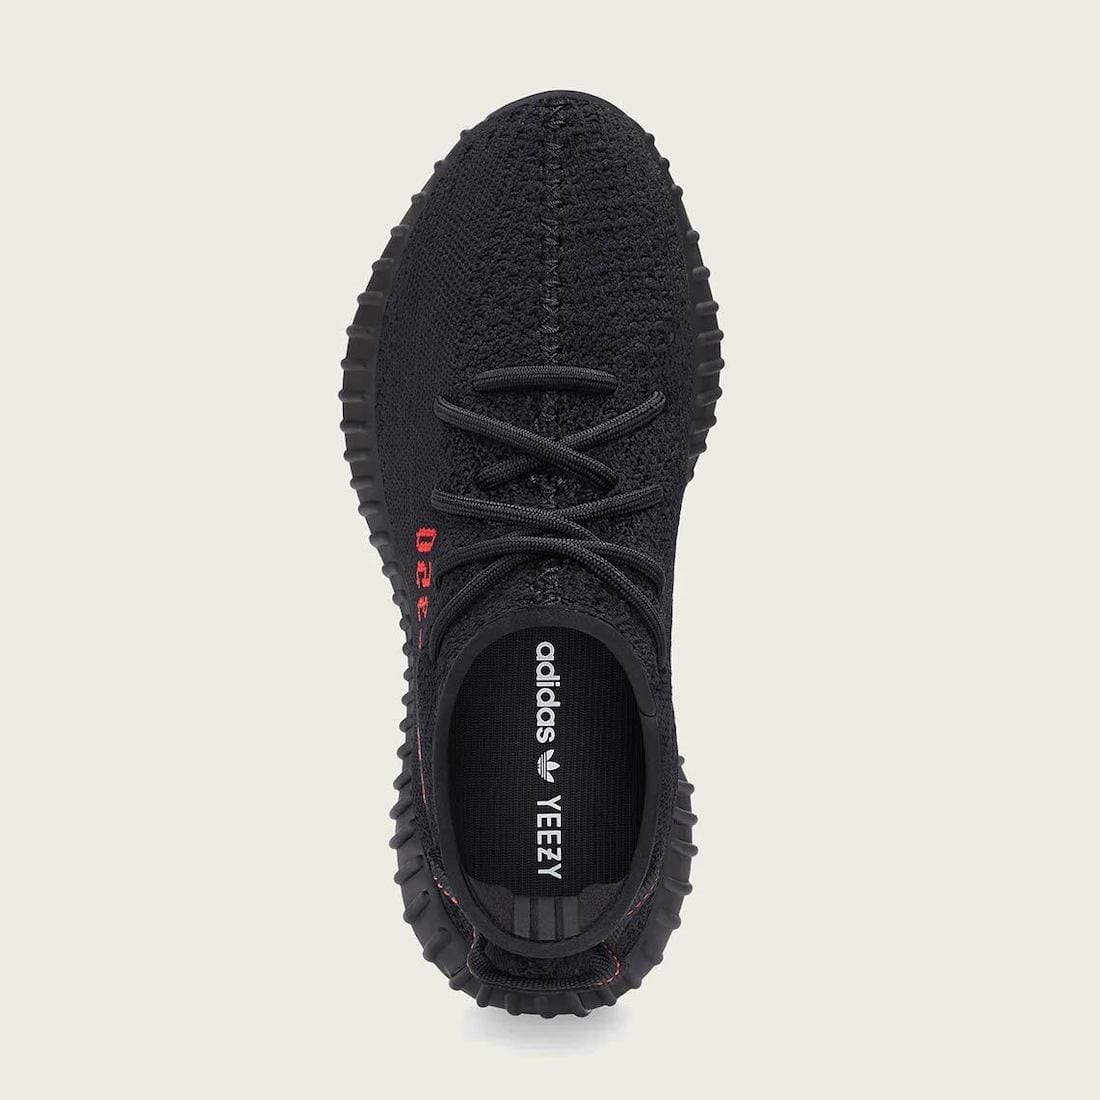 adidas-Yeezy-Boost-350-V2-Bred-Black-Red-CP9652-2020-Release-Date-3